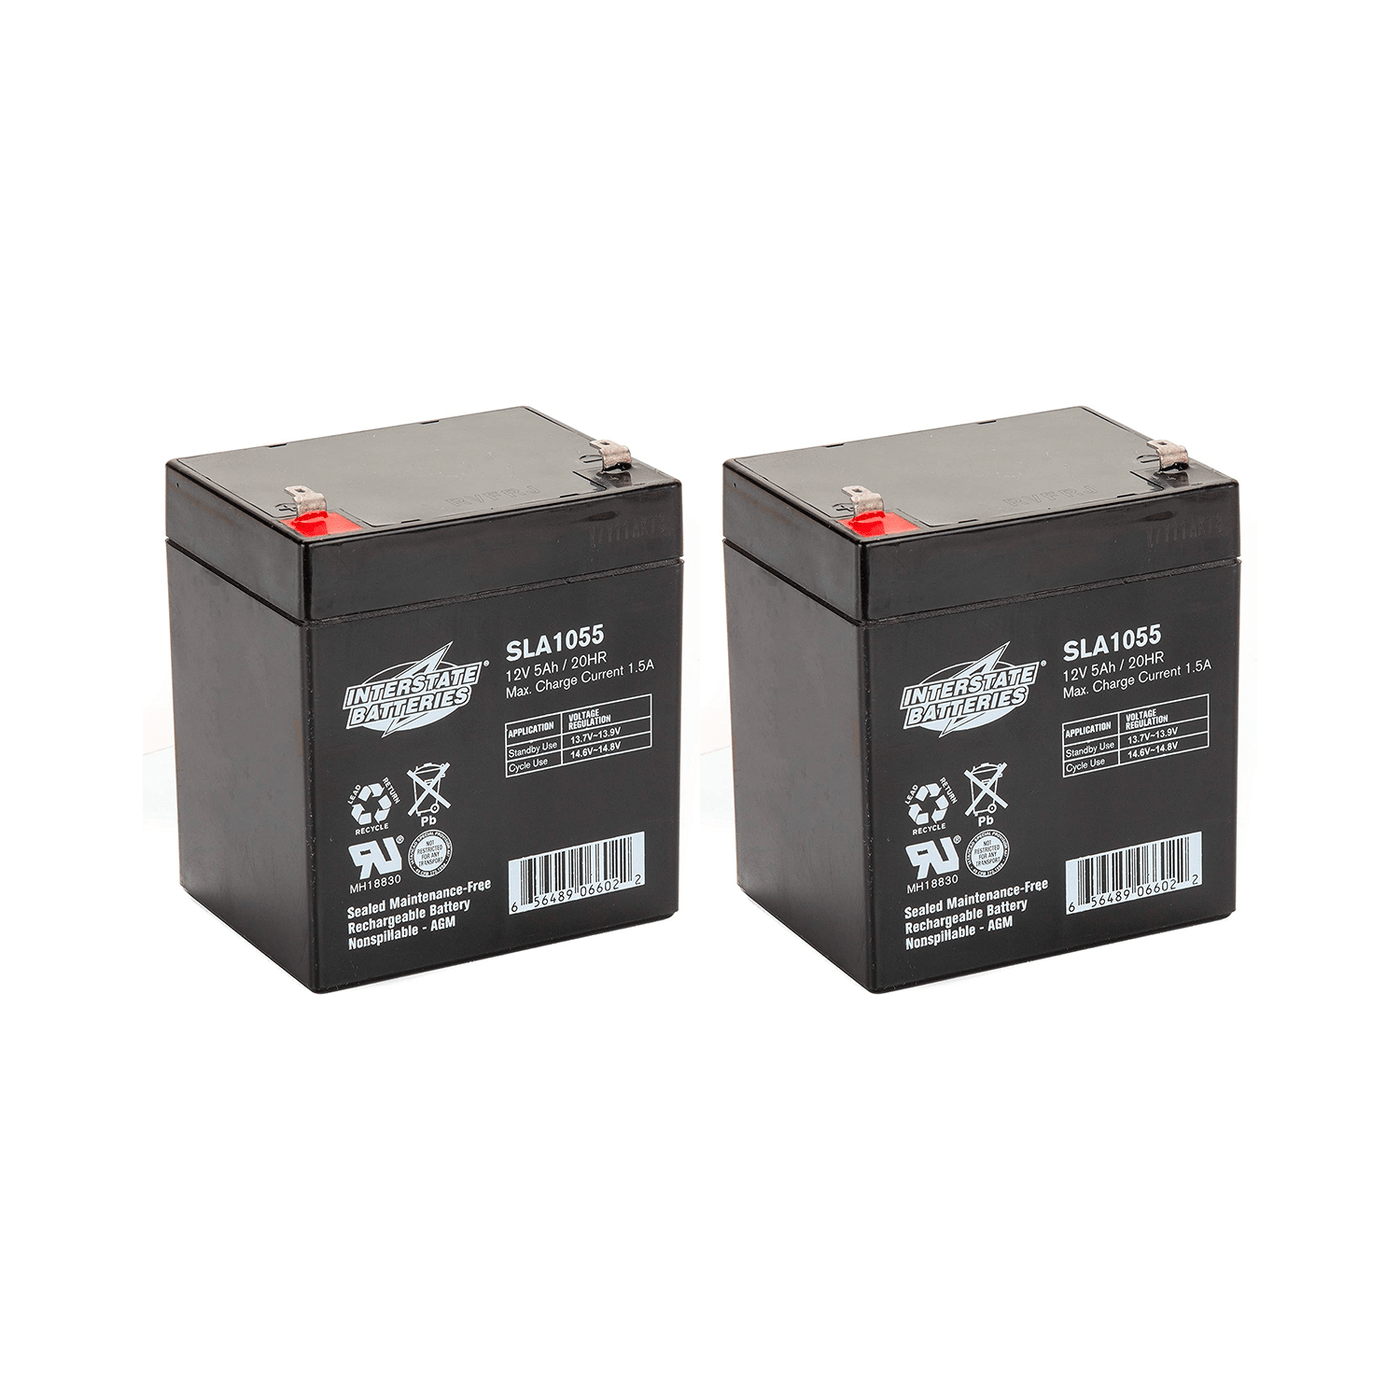 Bestcare Batteries for Electric Lifts (2-Pack) - Dansons Medical